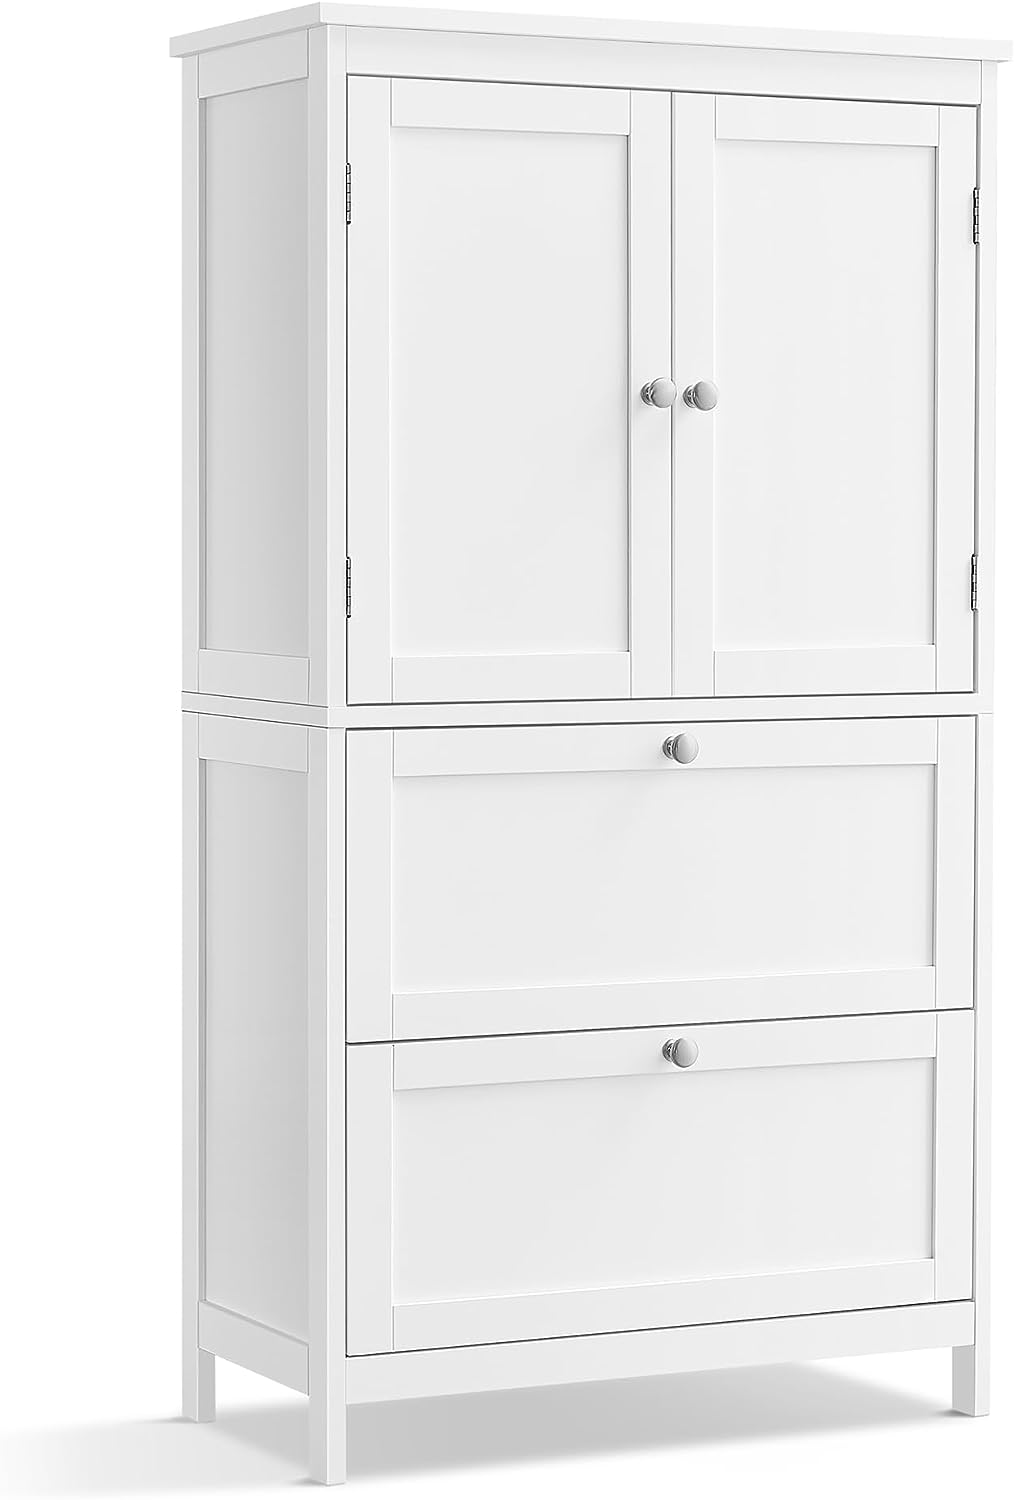 Bathroom Cabinet, Bathroom Cabinet, Kitchen Sideboard, Cabinet with 2 Drawers and 2 Doors